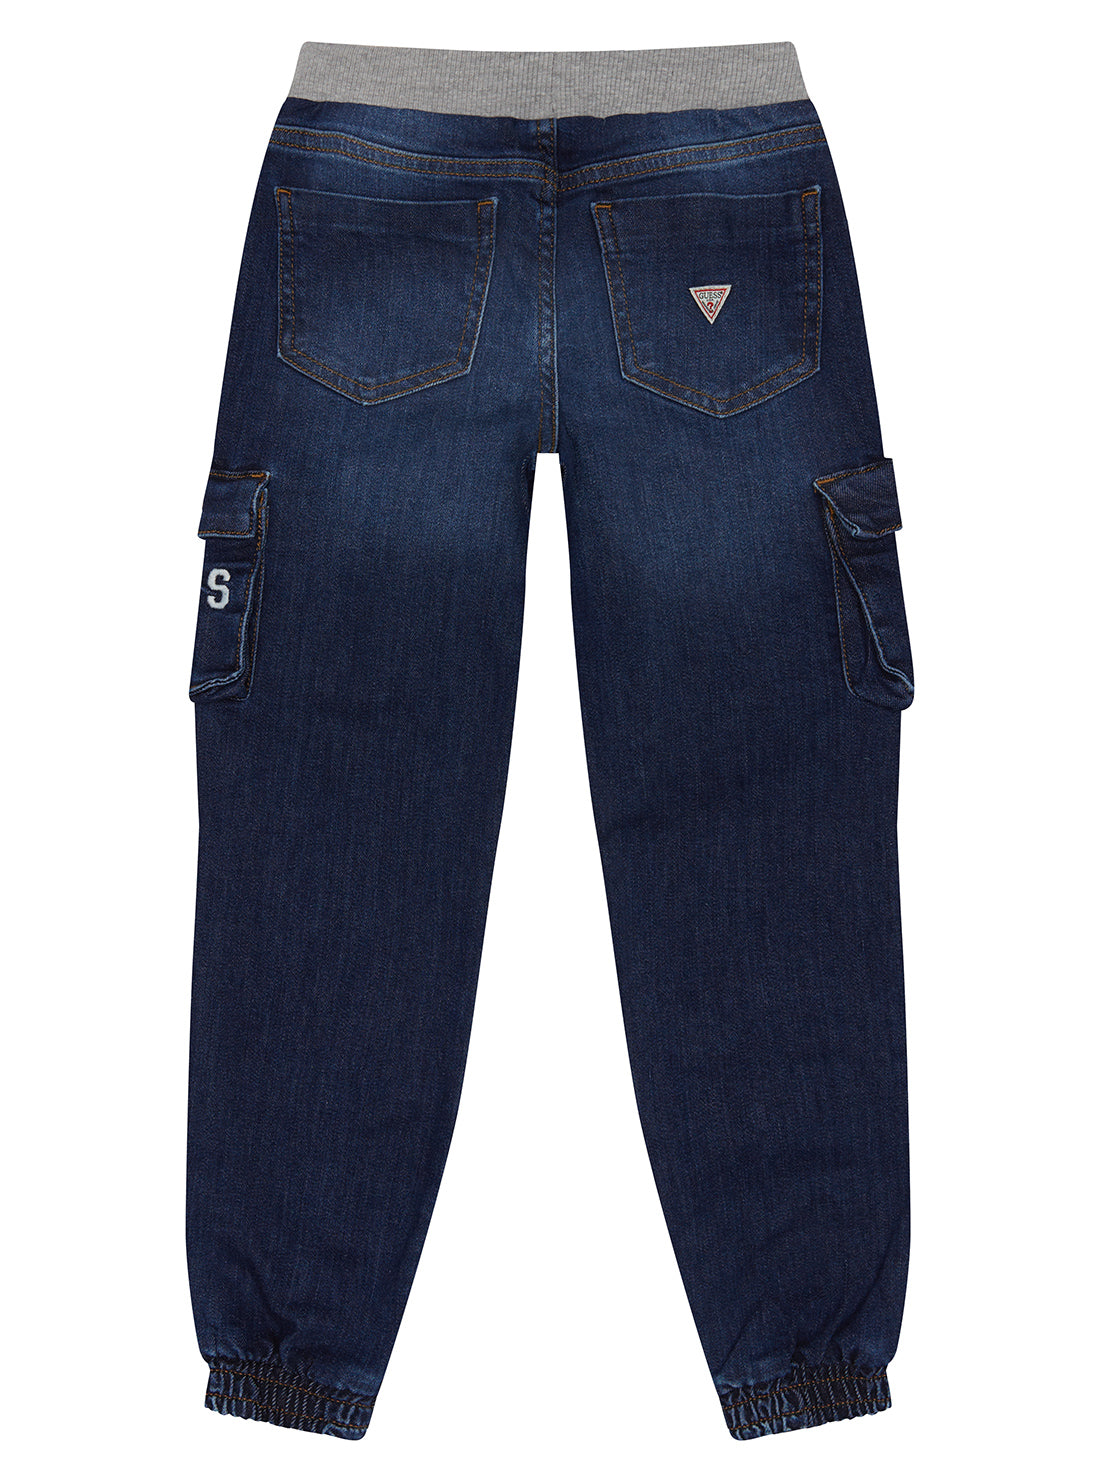 GUESS Blue Denim Pull On Pants (2-7) back view